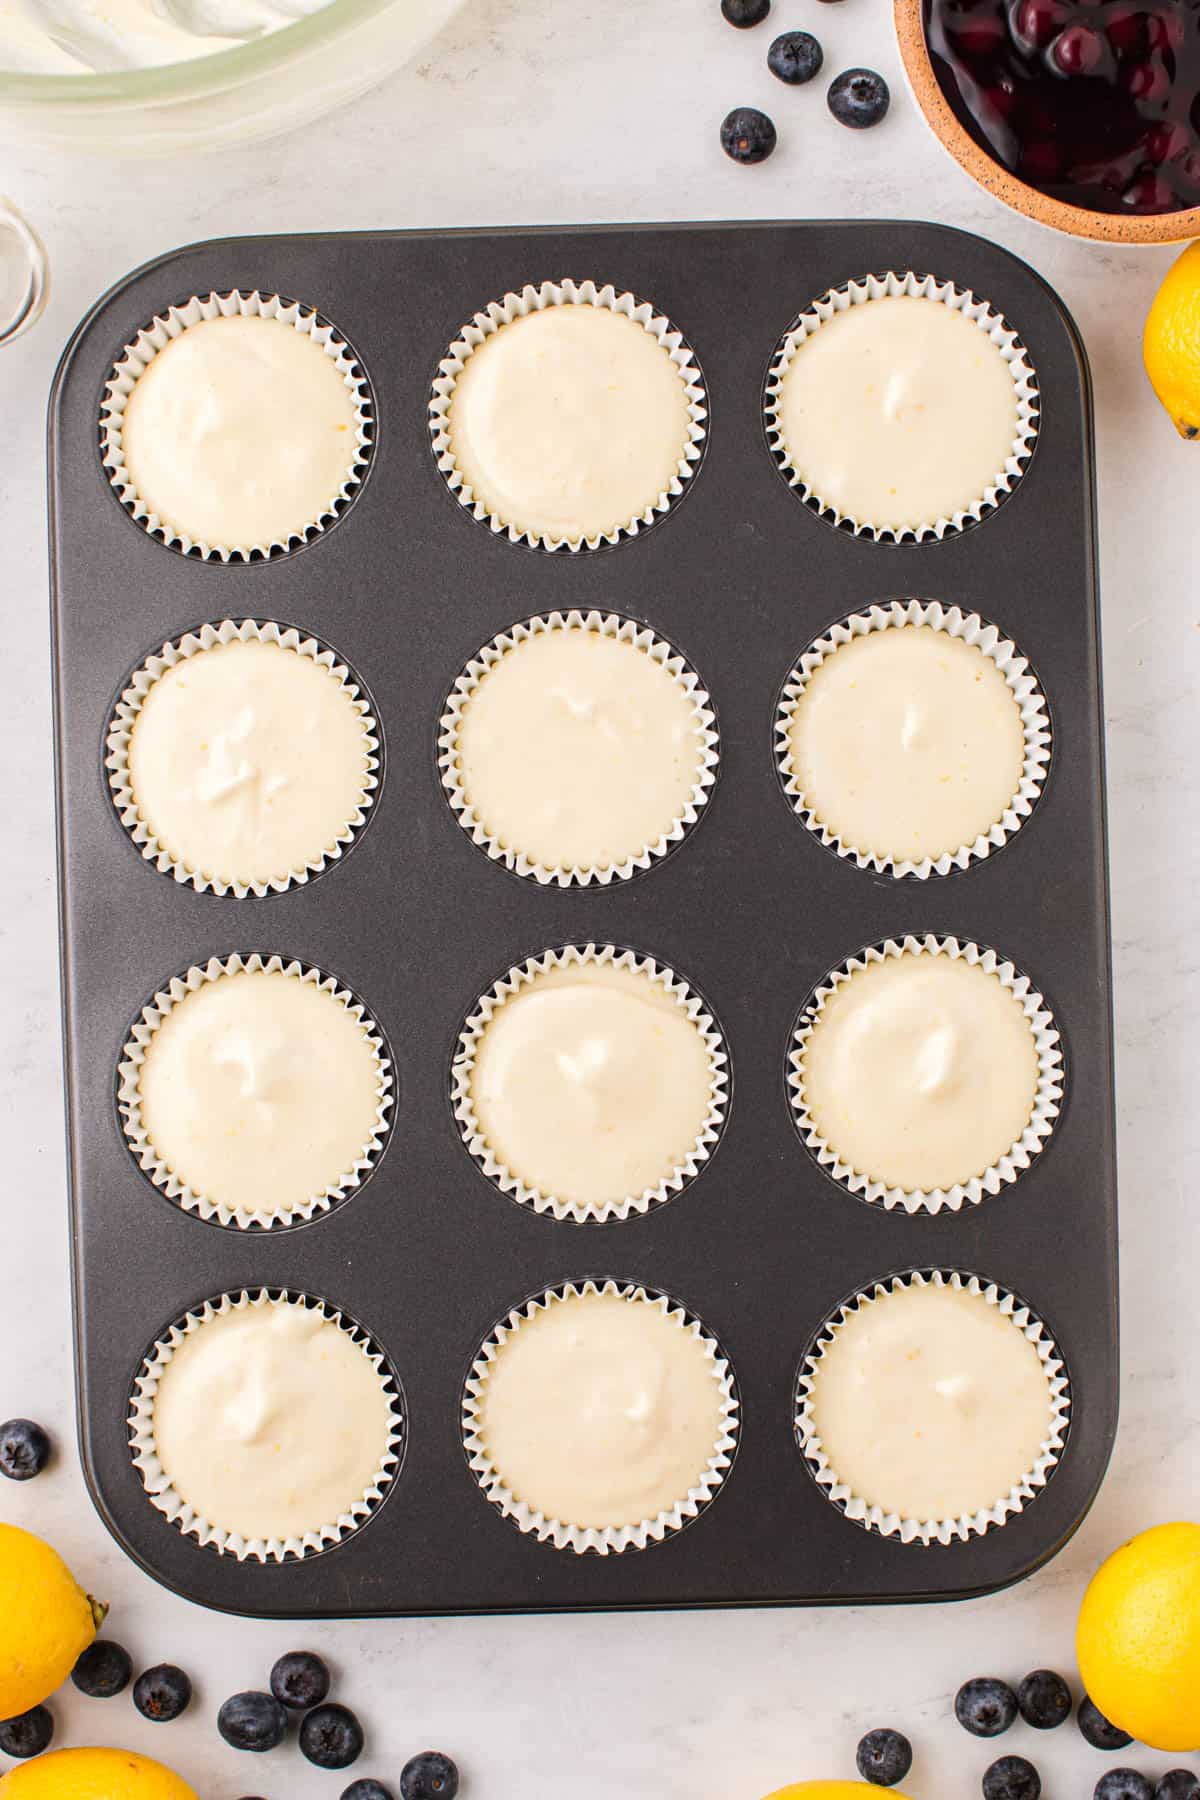 Dividing cheesecake batter between cups of a muffin pan.